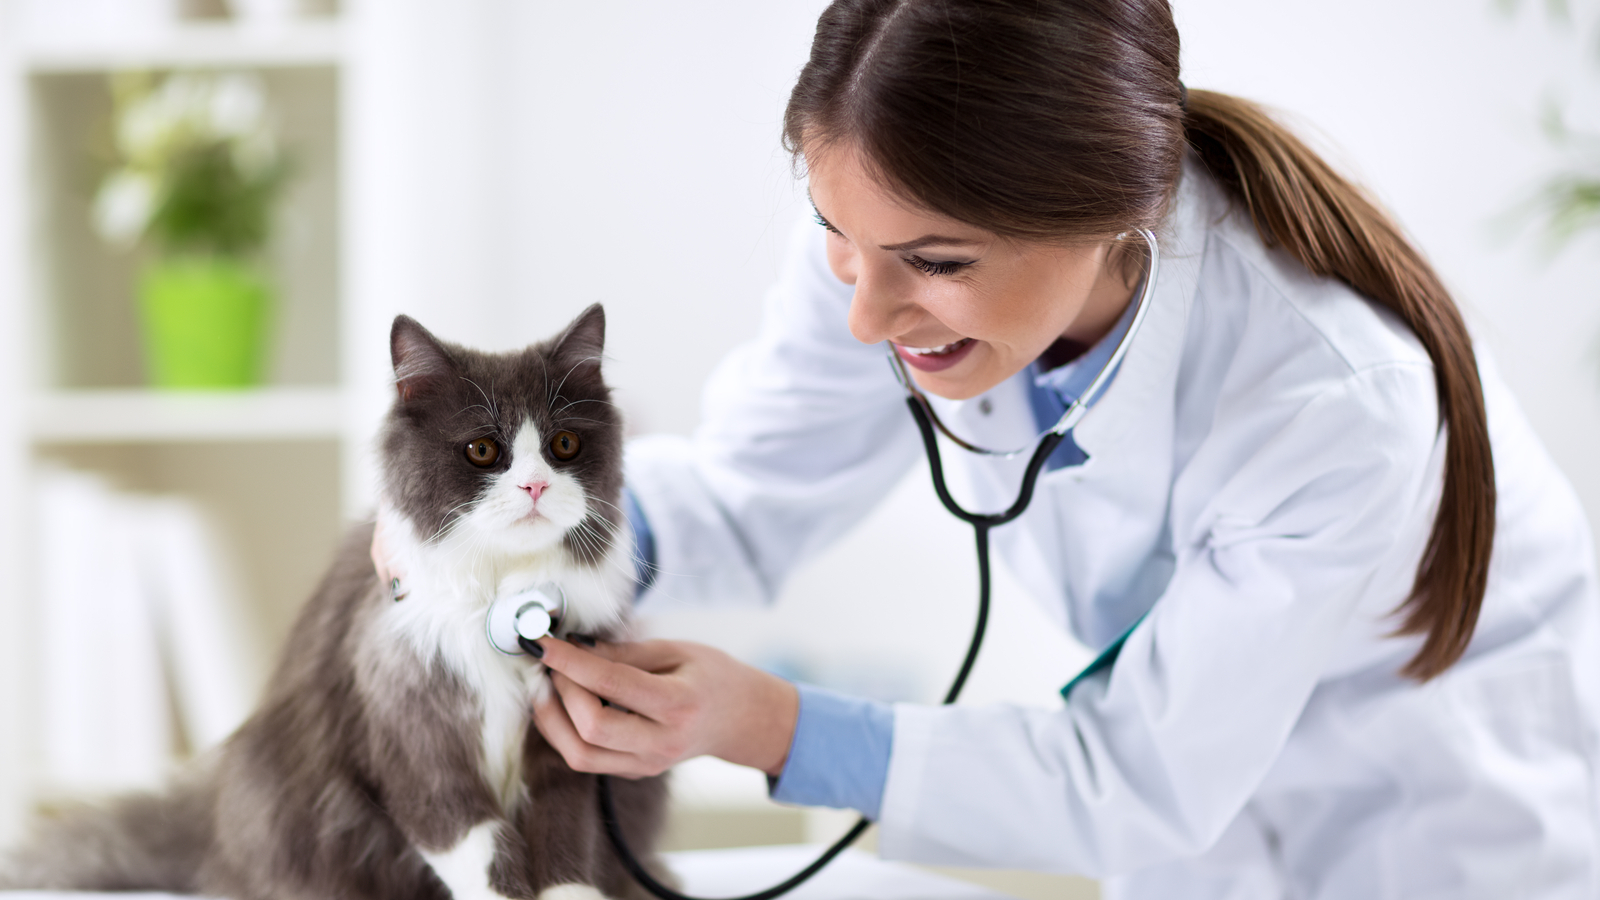 ZOM stock: Persian cat with veterinarian doctor at vet clinic